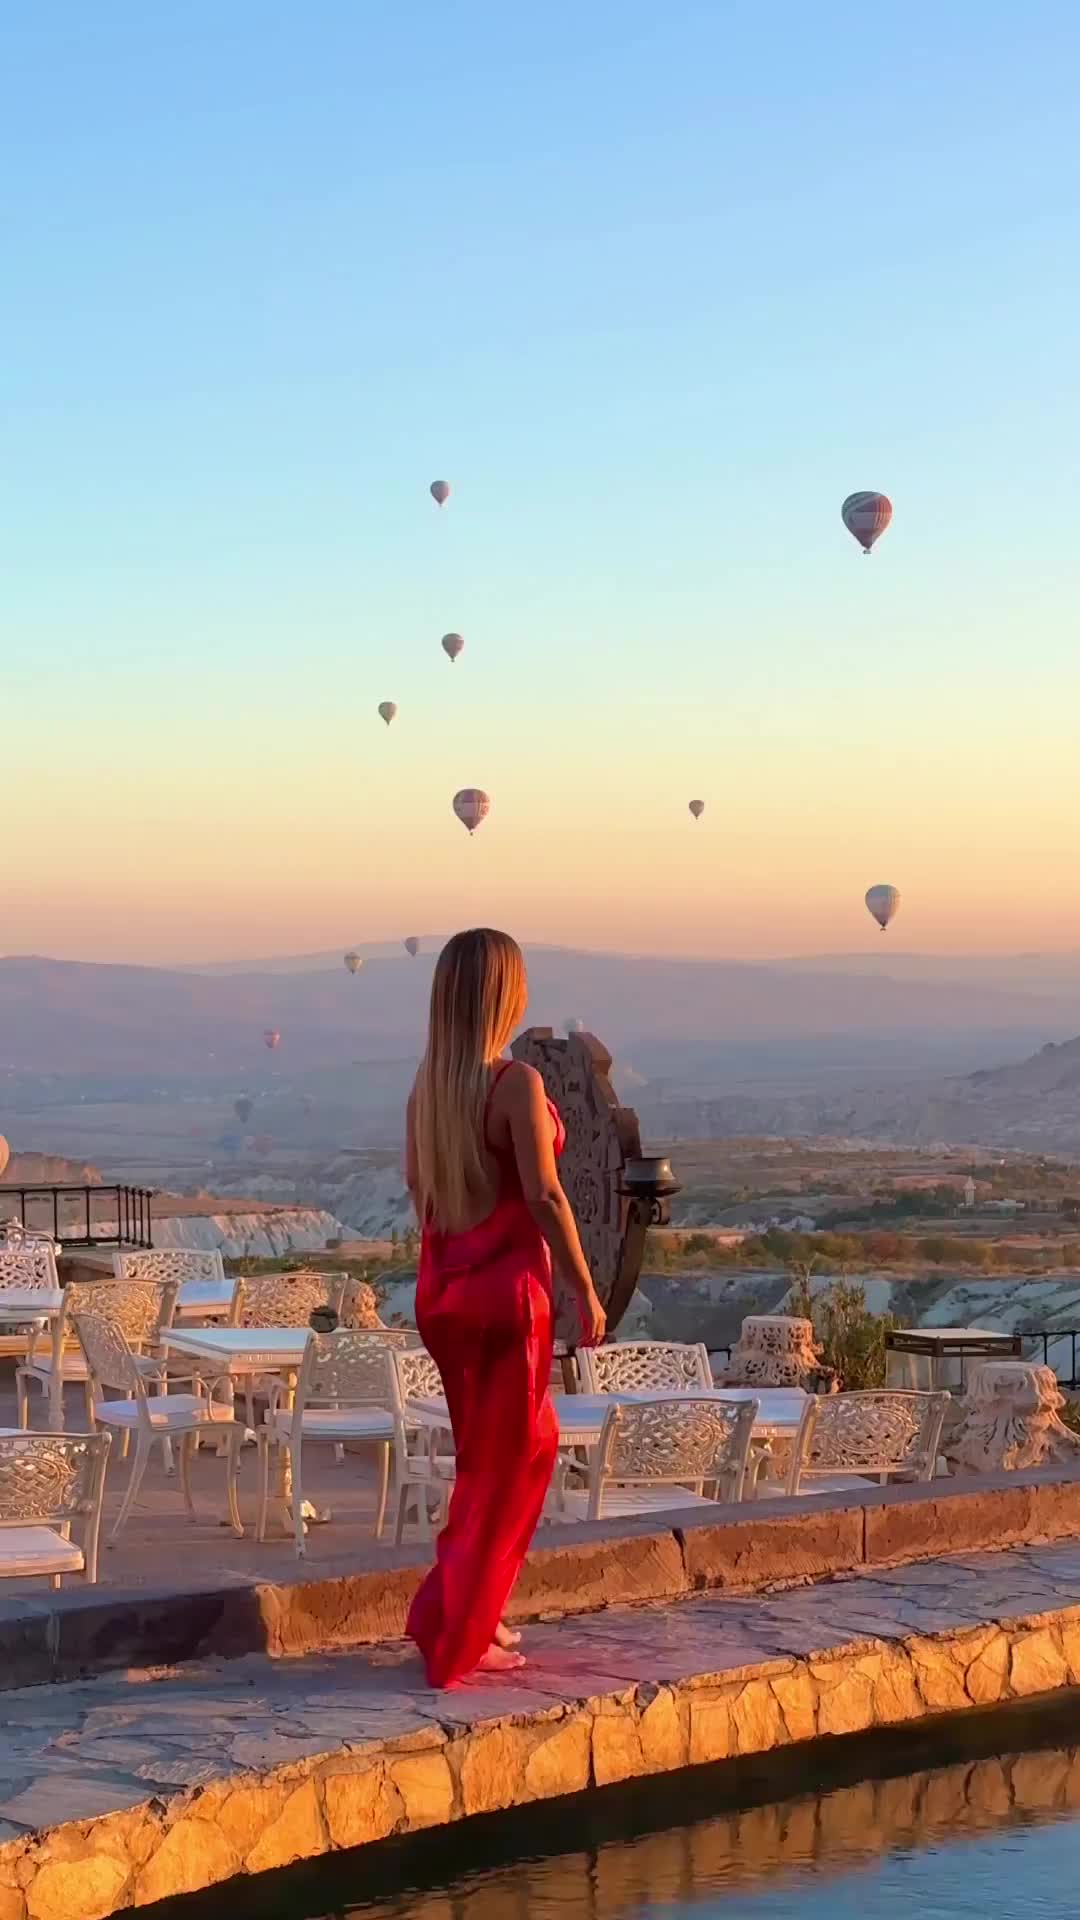 Living the dream at @museumhotel 🎈
There is no better way to spend my birthday? 🎉

🏷️ Tag someone you’d like to spend these magical moments with 🎈

📍Uçhisar, Cappadocia 🇹🇷

#cappadocia #kapadokya #turkey #türkiye #visitturkey #hotairballoon #luxurytravel #luxuryhotel #luxurylifestyle #travel #traveladdict #beautifuldestinations #traveltheworld #explore #viralreels